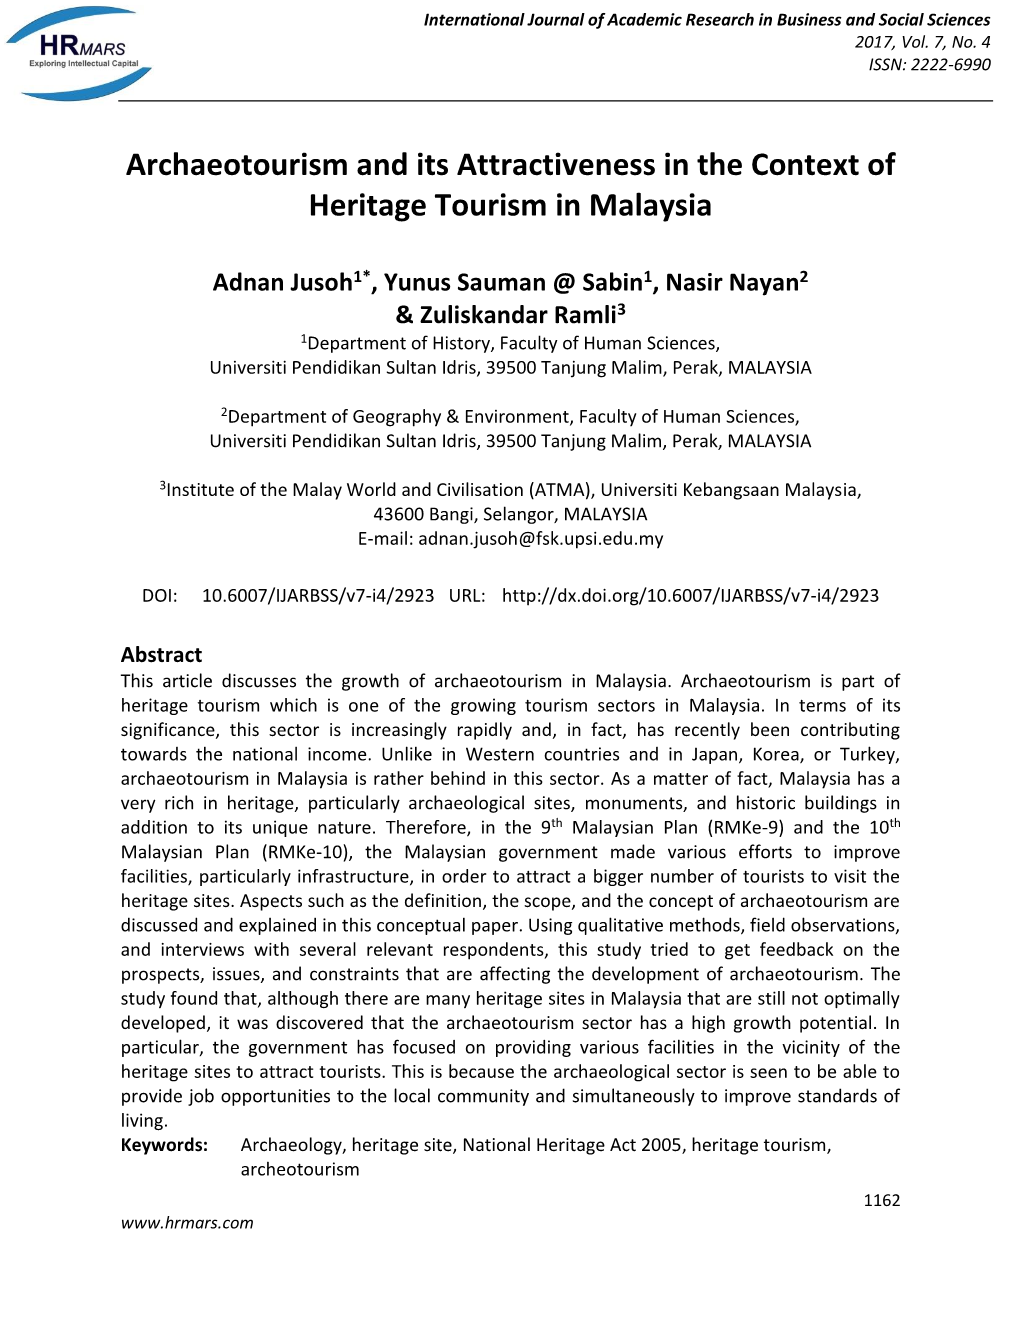 Archaeotourism and Its Attractiveness in the Context of Heritage Tourism in Malaysia